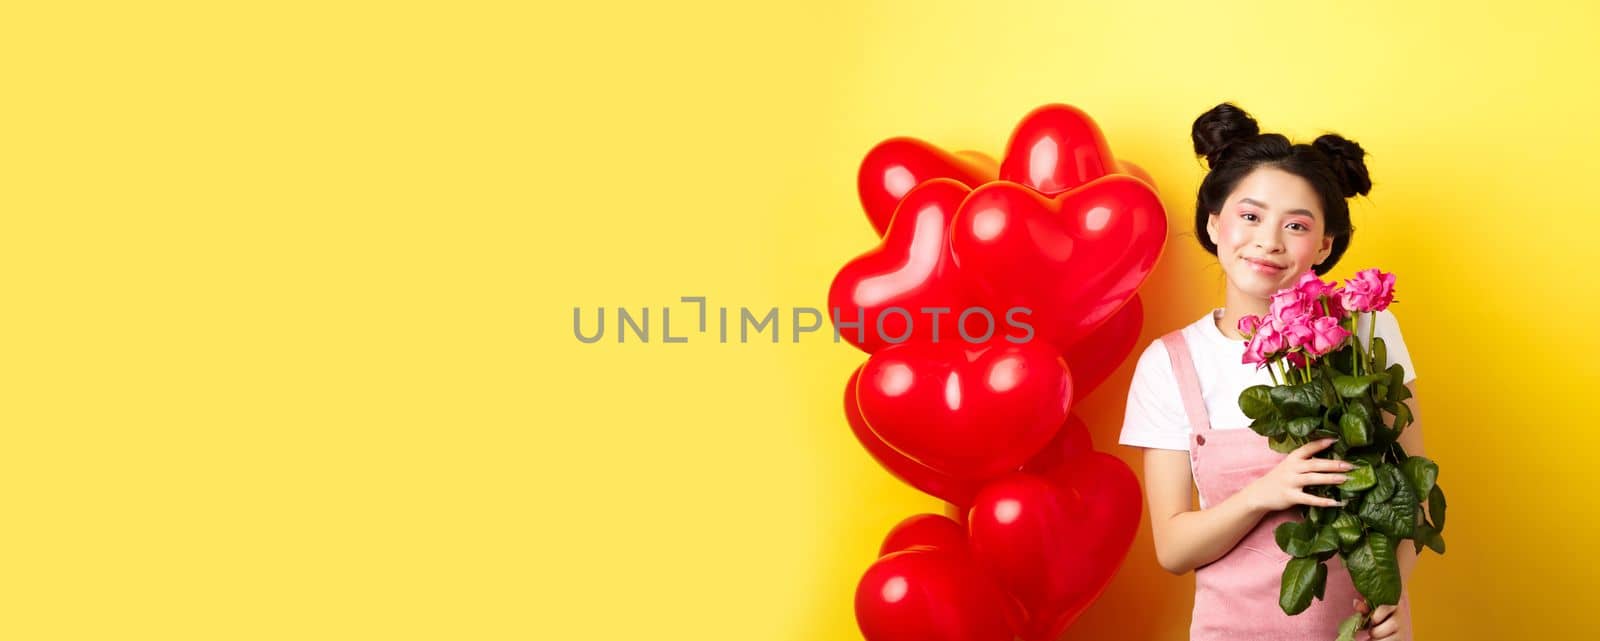 Happy Valentines day. Beautiful asian woman dressed for romantic date, holding bouquet of flowers and smiling. Girl with roses standing near heart balloons, yellow background.